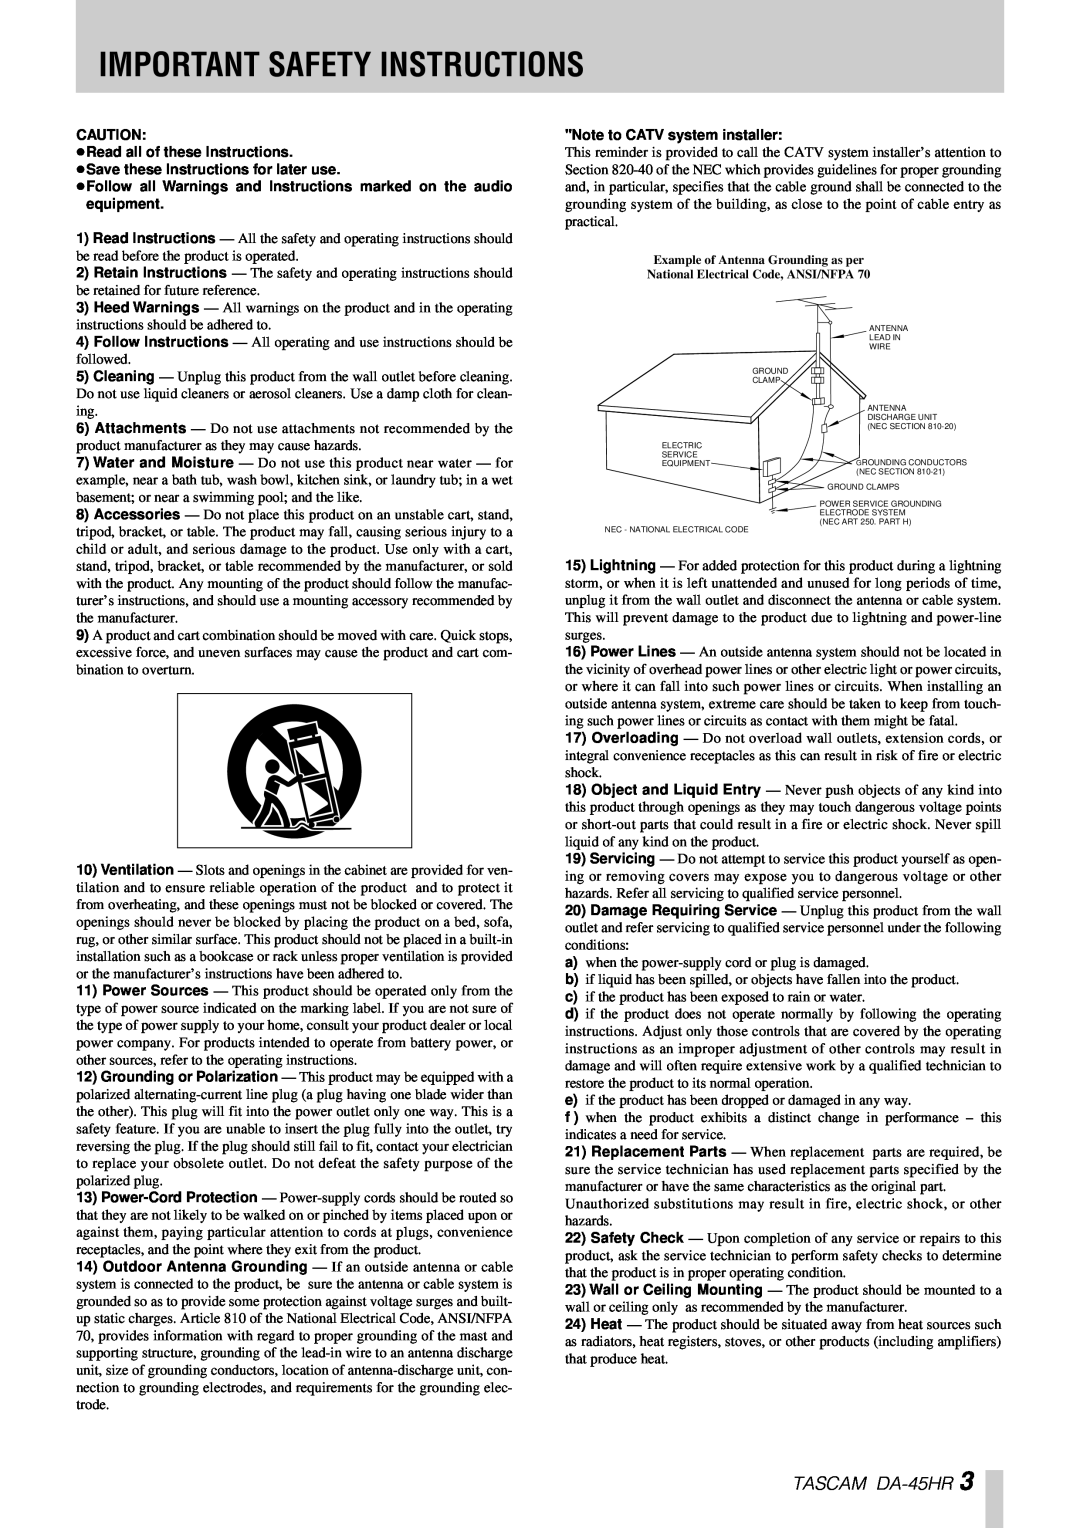 Tascam Important Safety Instructions, TASCAM DA-45HR, …Read all of these Instructions, Note to CATV system installer 